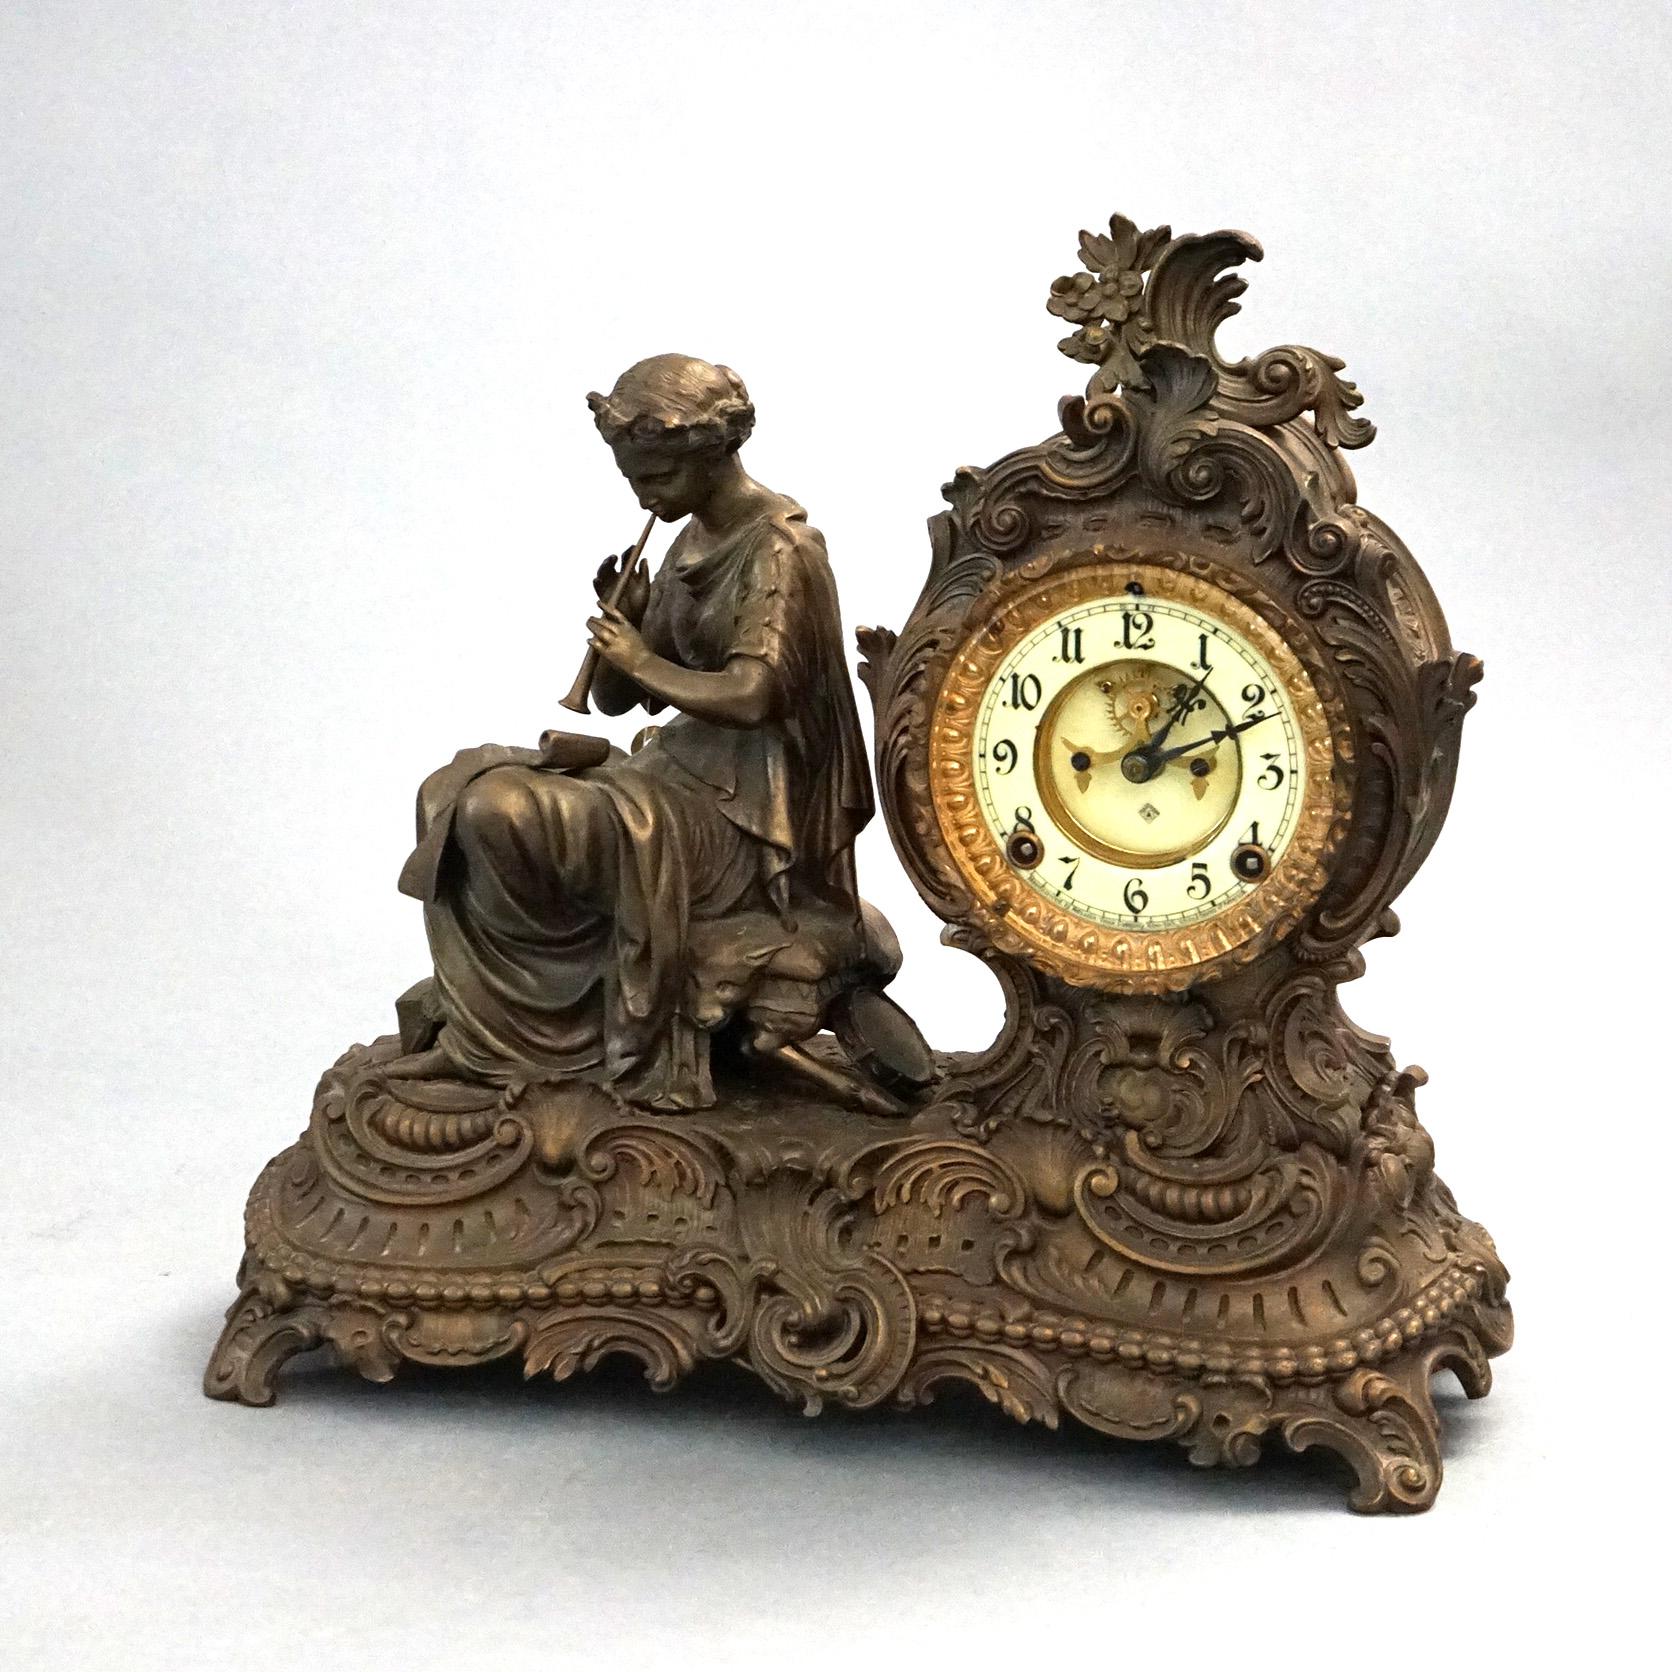 Antique Ansonia Bronzed Metal Figural Mantel Clock with Sculpture of a Classical Woman Playing Flute, C1890

Measures - 14.5